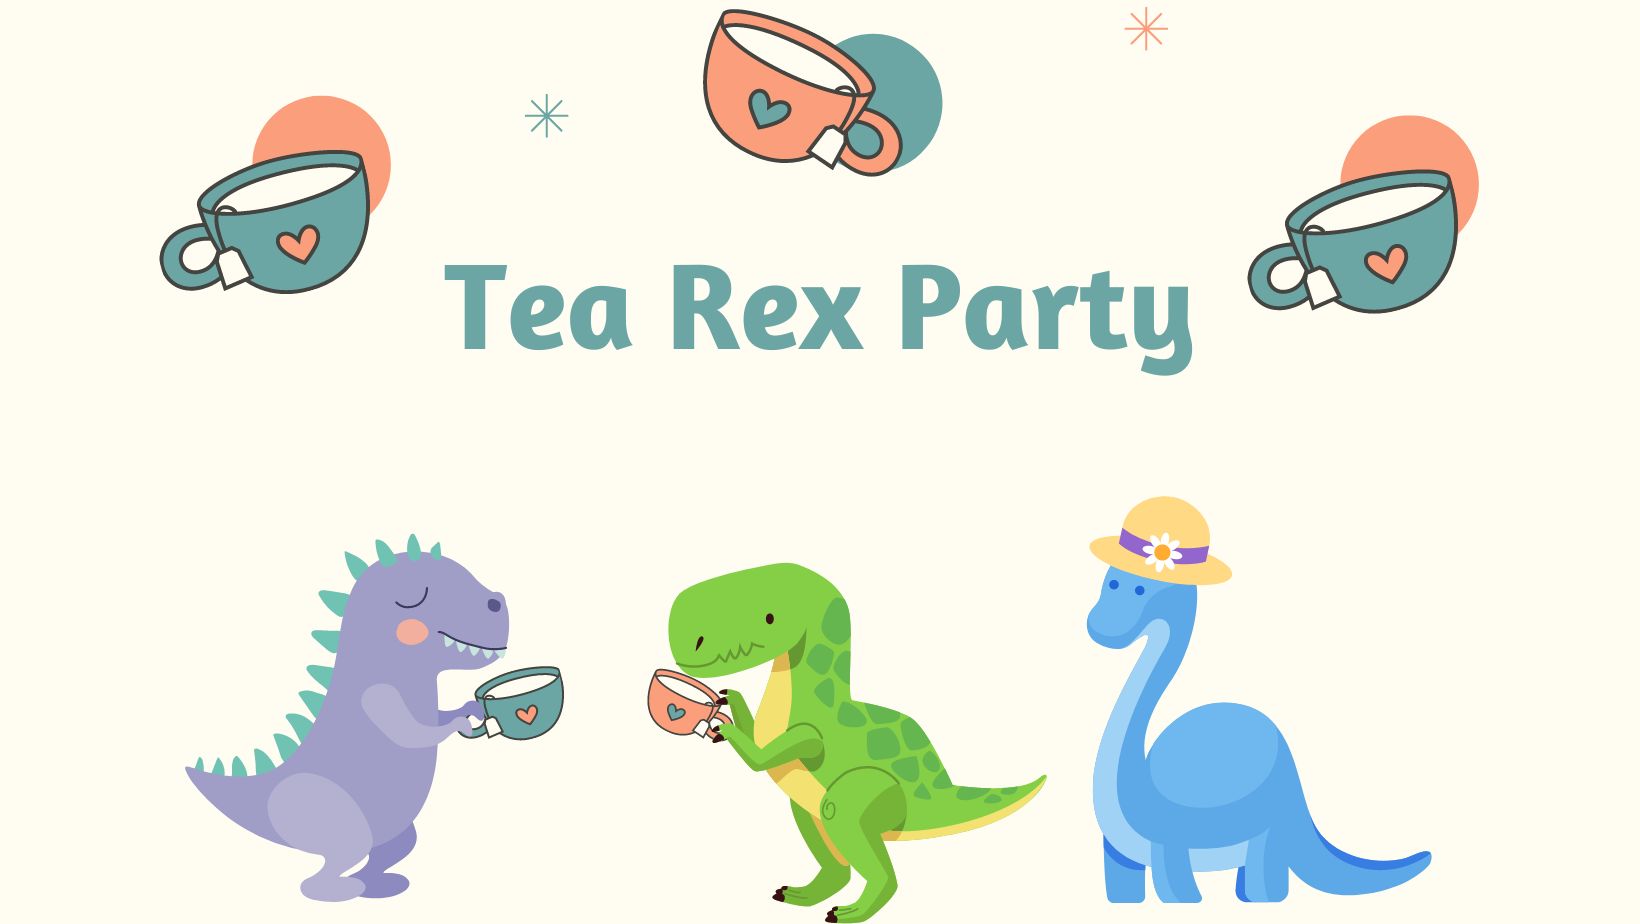 The words "Tea Rex Party" with small cartoon dinosaurs holding teacups.  